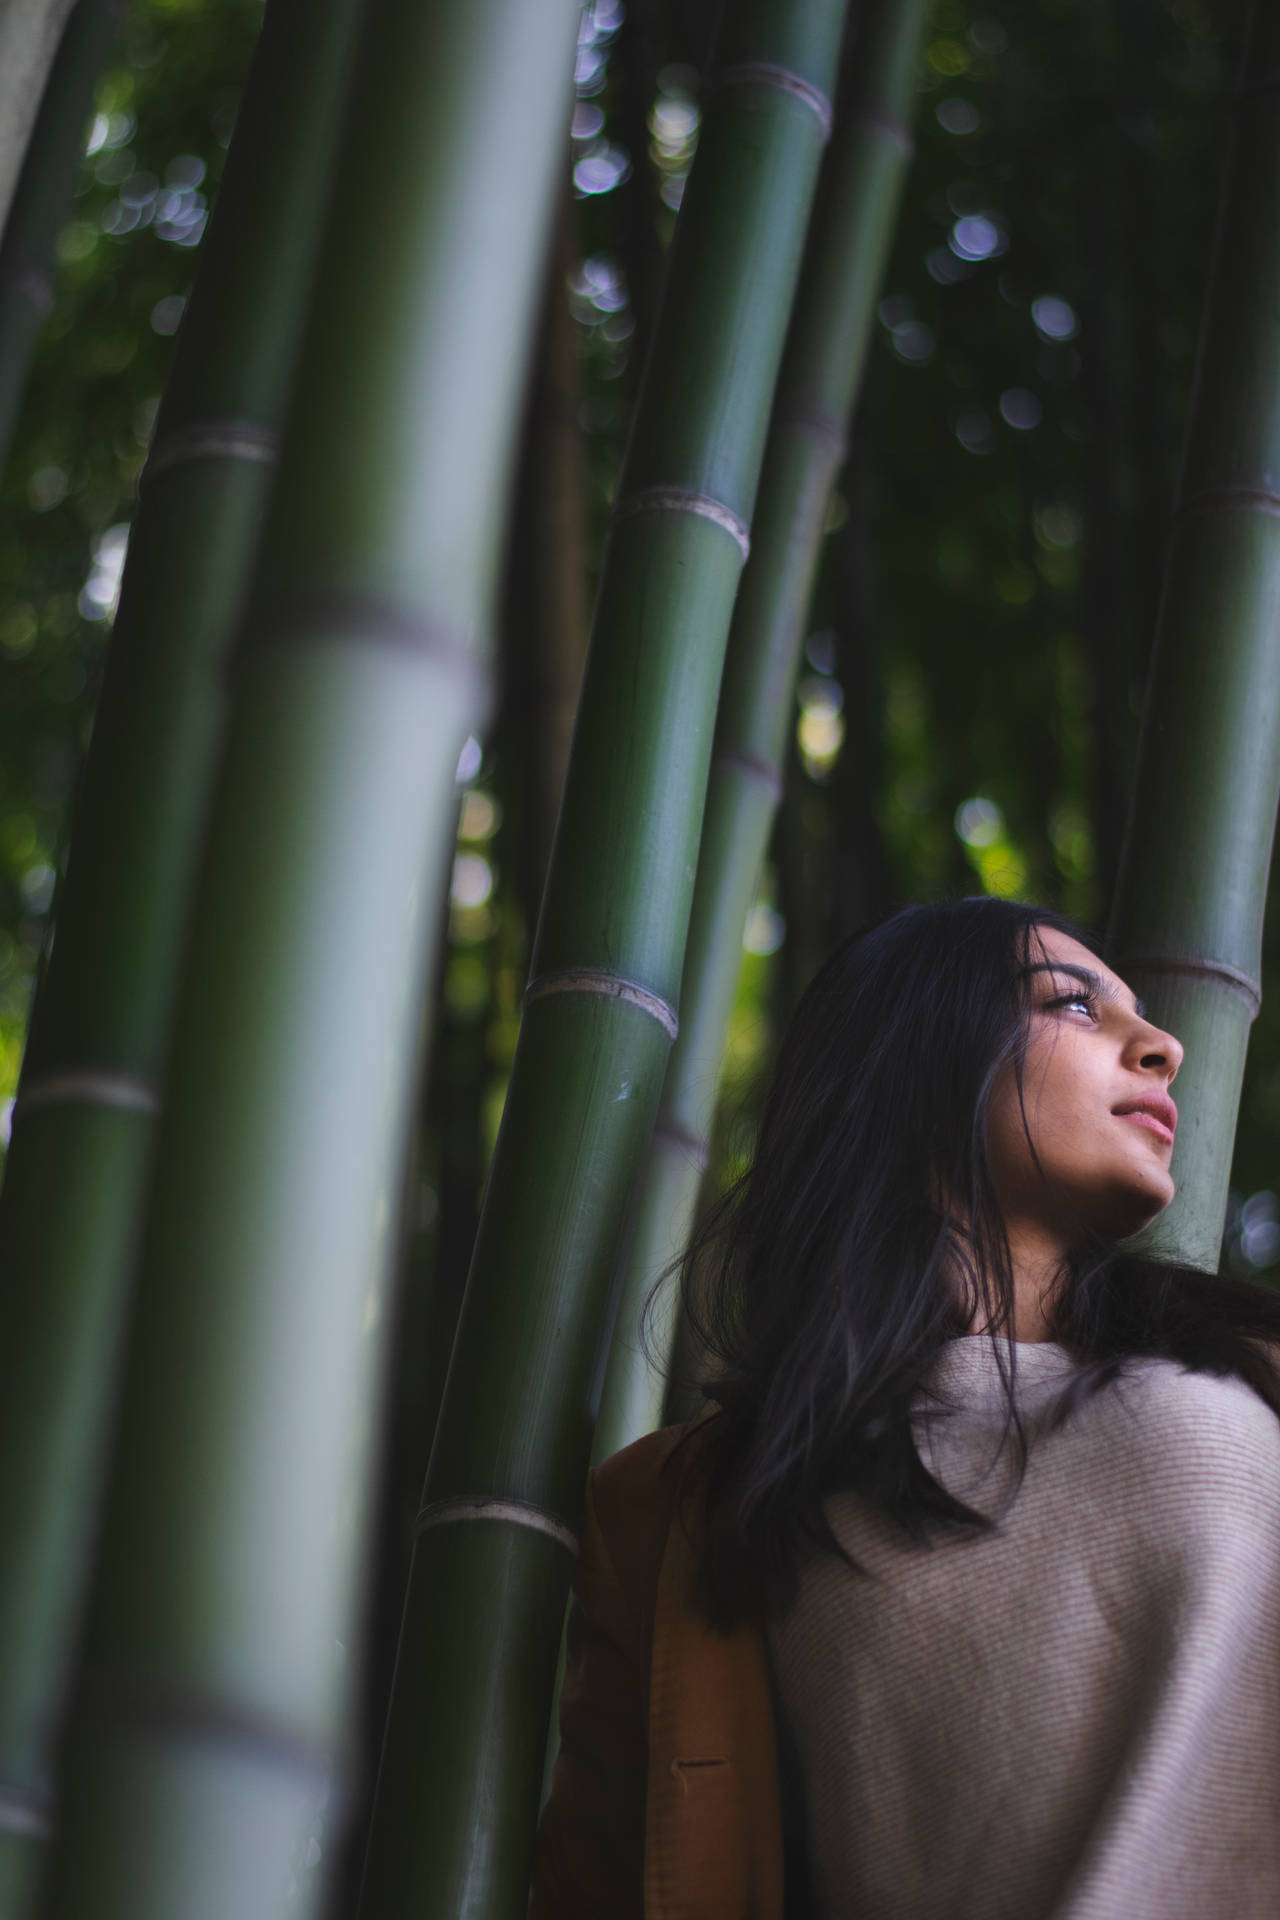 Woman By The Bamboo Pole Background